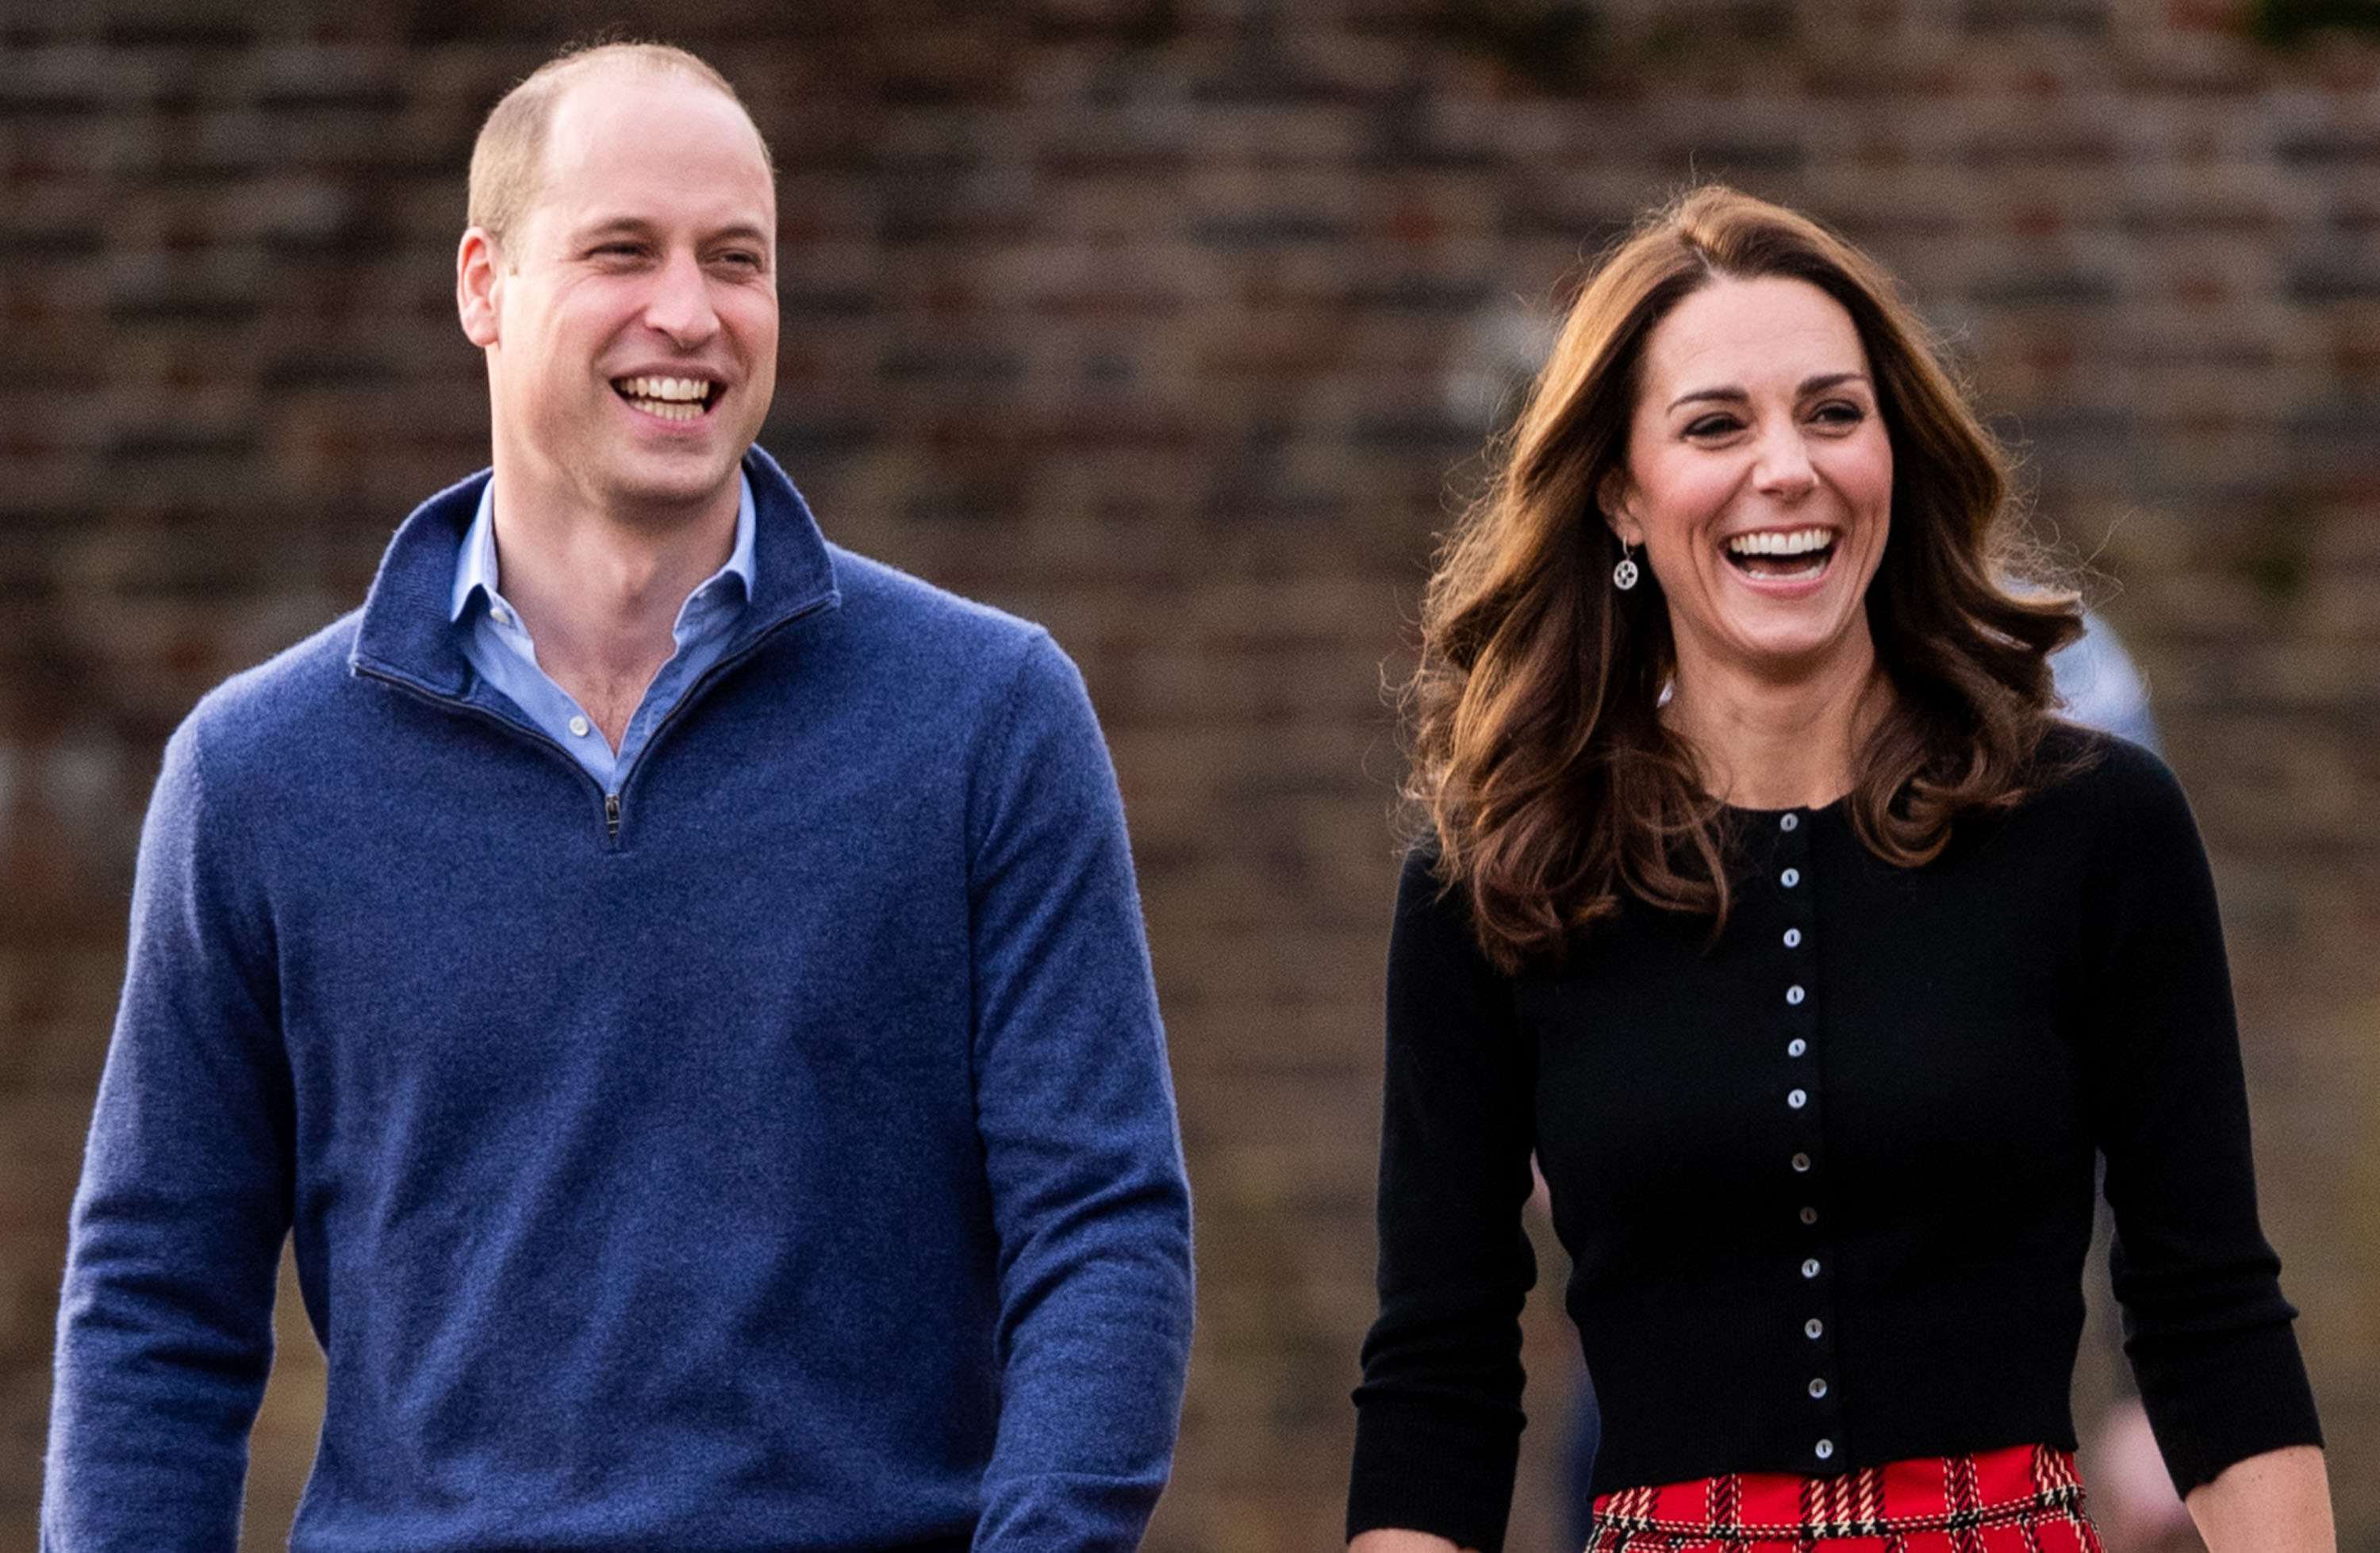 Prince William and Kate Middleton attend a Christmas Party at Kensington Palace on December 4, 2018 in London, England. | Source: Getty Images